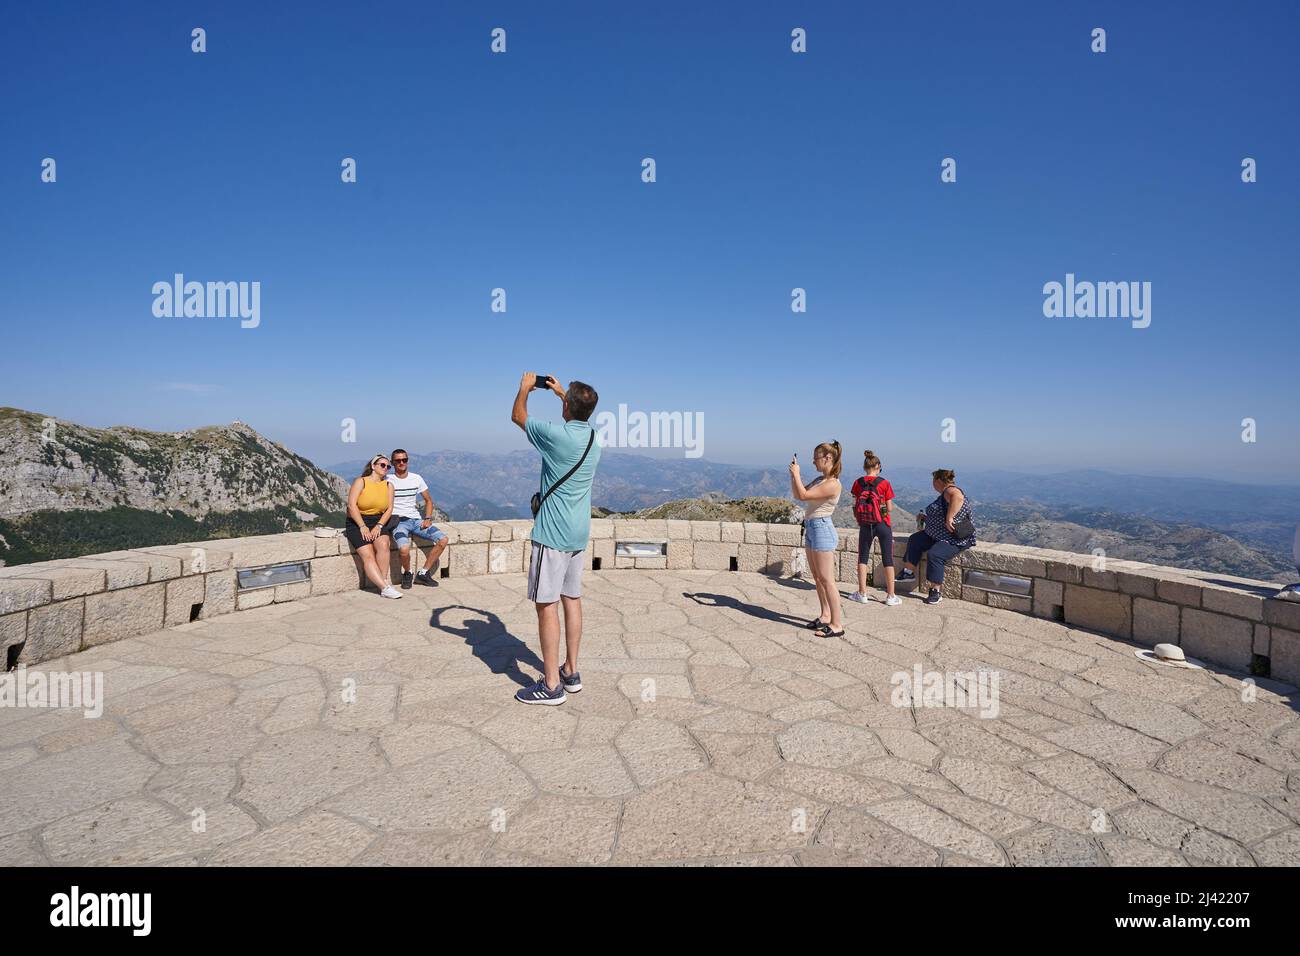 CETINJE, MONTENEGRO - JULY 23, 2021: Tourists take photos in the mountains in Lovcen National Park Stock Photo